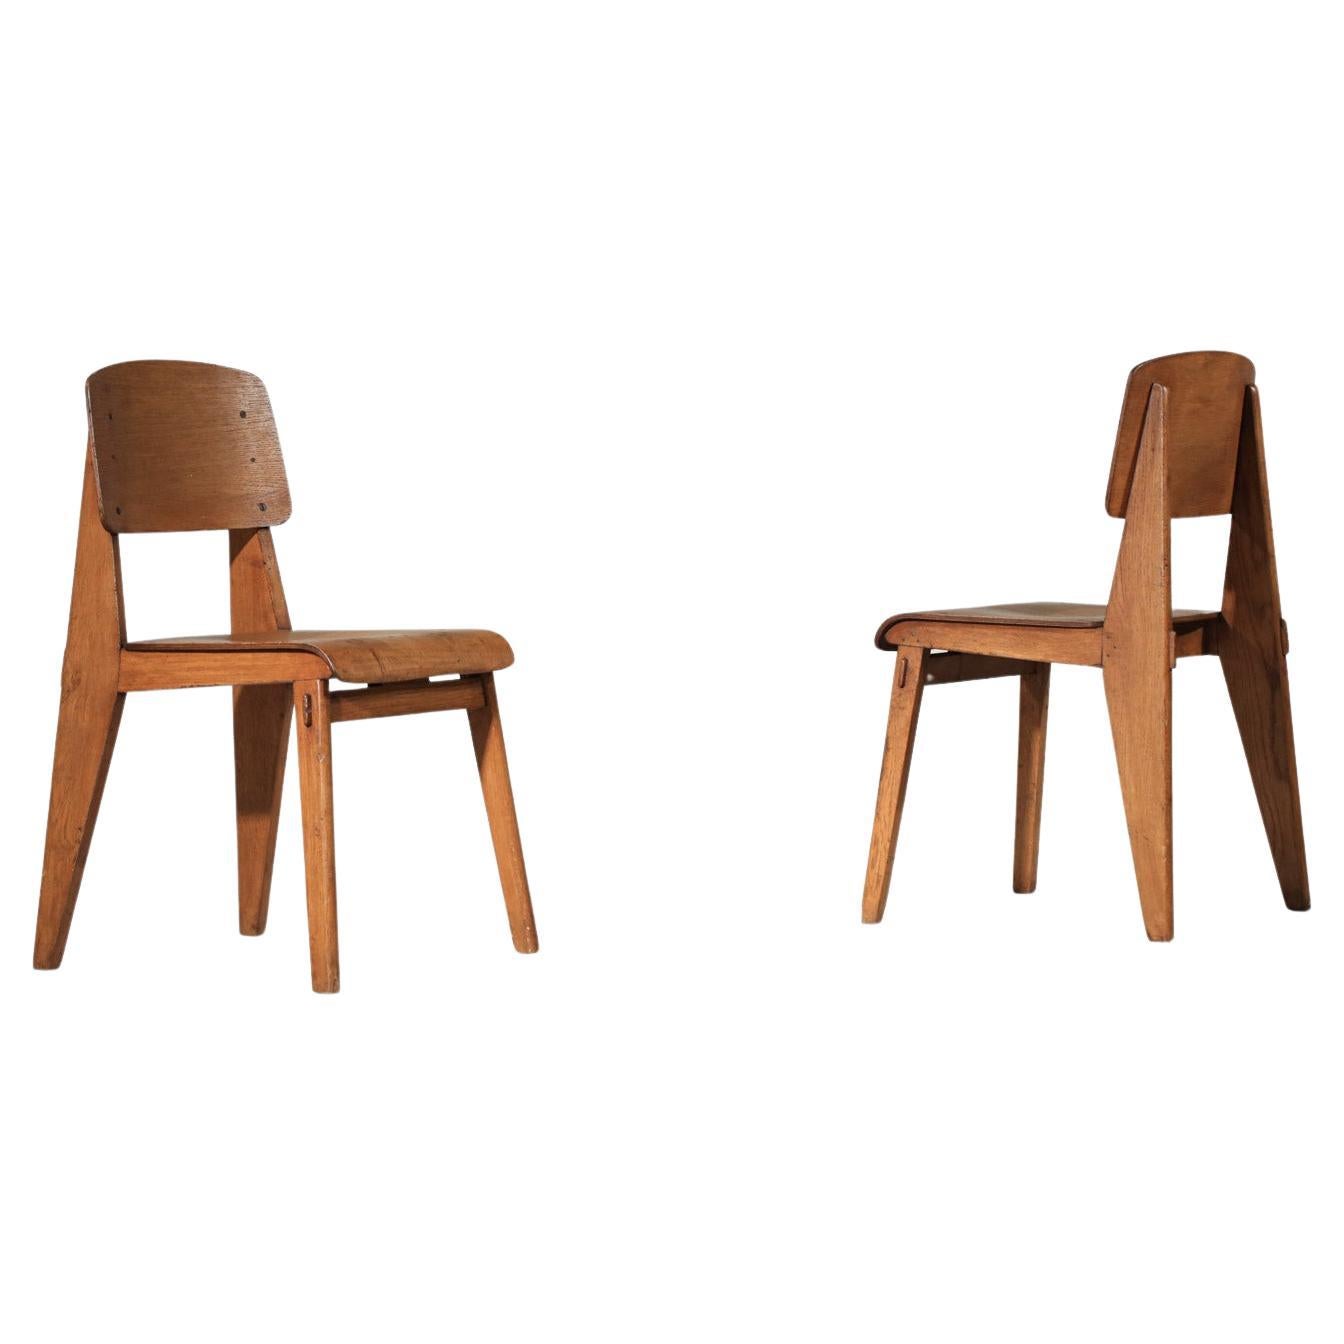 rare Pair of Jean Prouvé all-wood chairs 1950's French design 